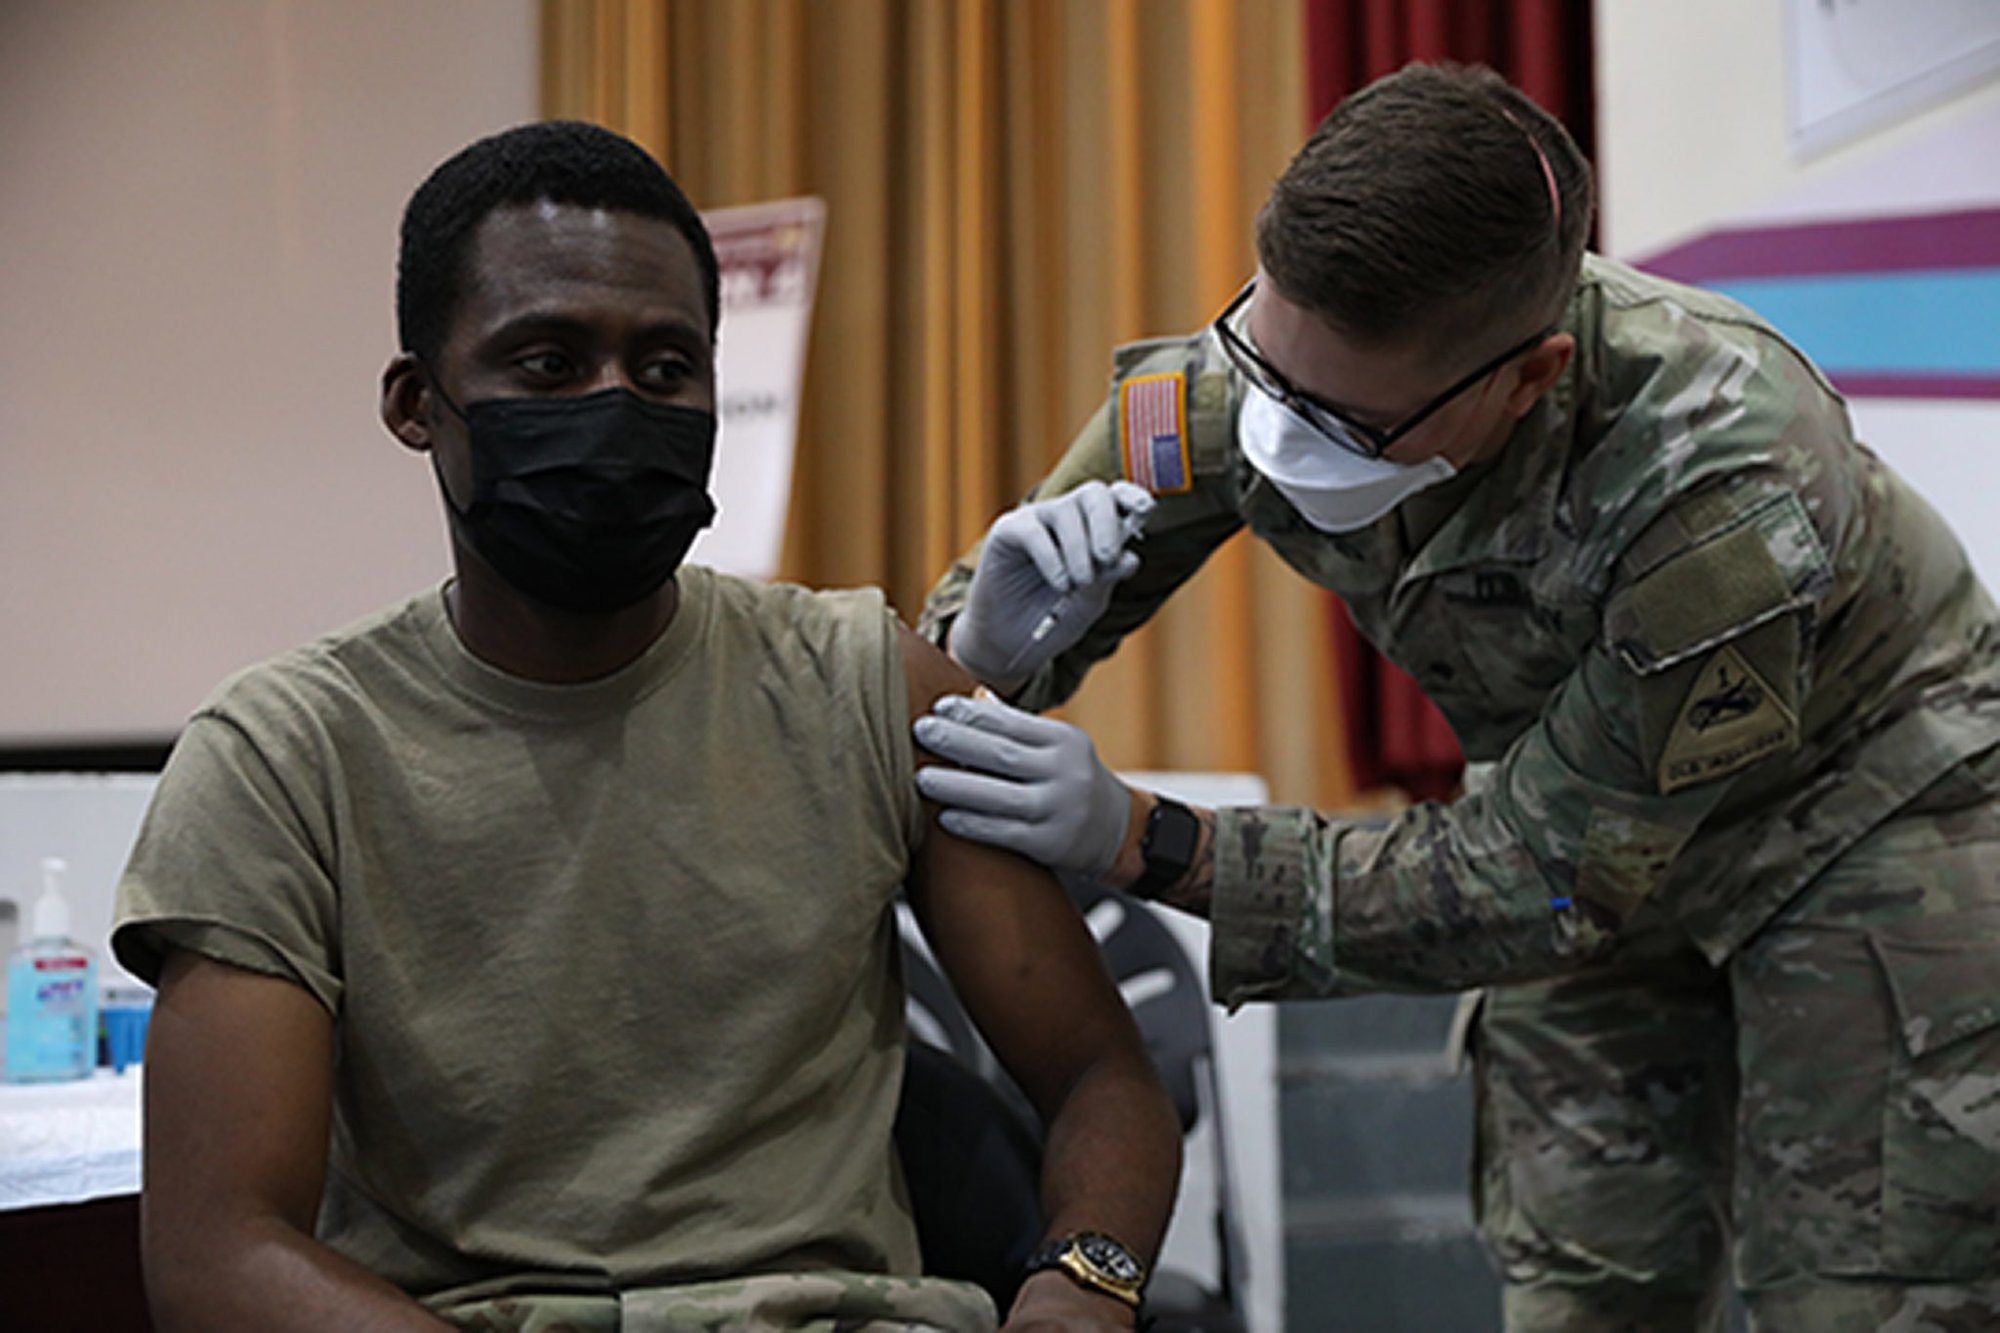 Military branches have announced the deadlines for active duty, Guard, and Reserve units to receive their coronavirus vaccines. Few exceptions will be made for those seeking medical or religious exemptions. US Army photo by Pfc. Maxwell Bass.